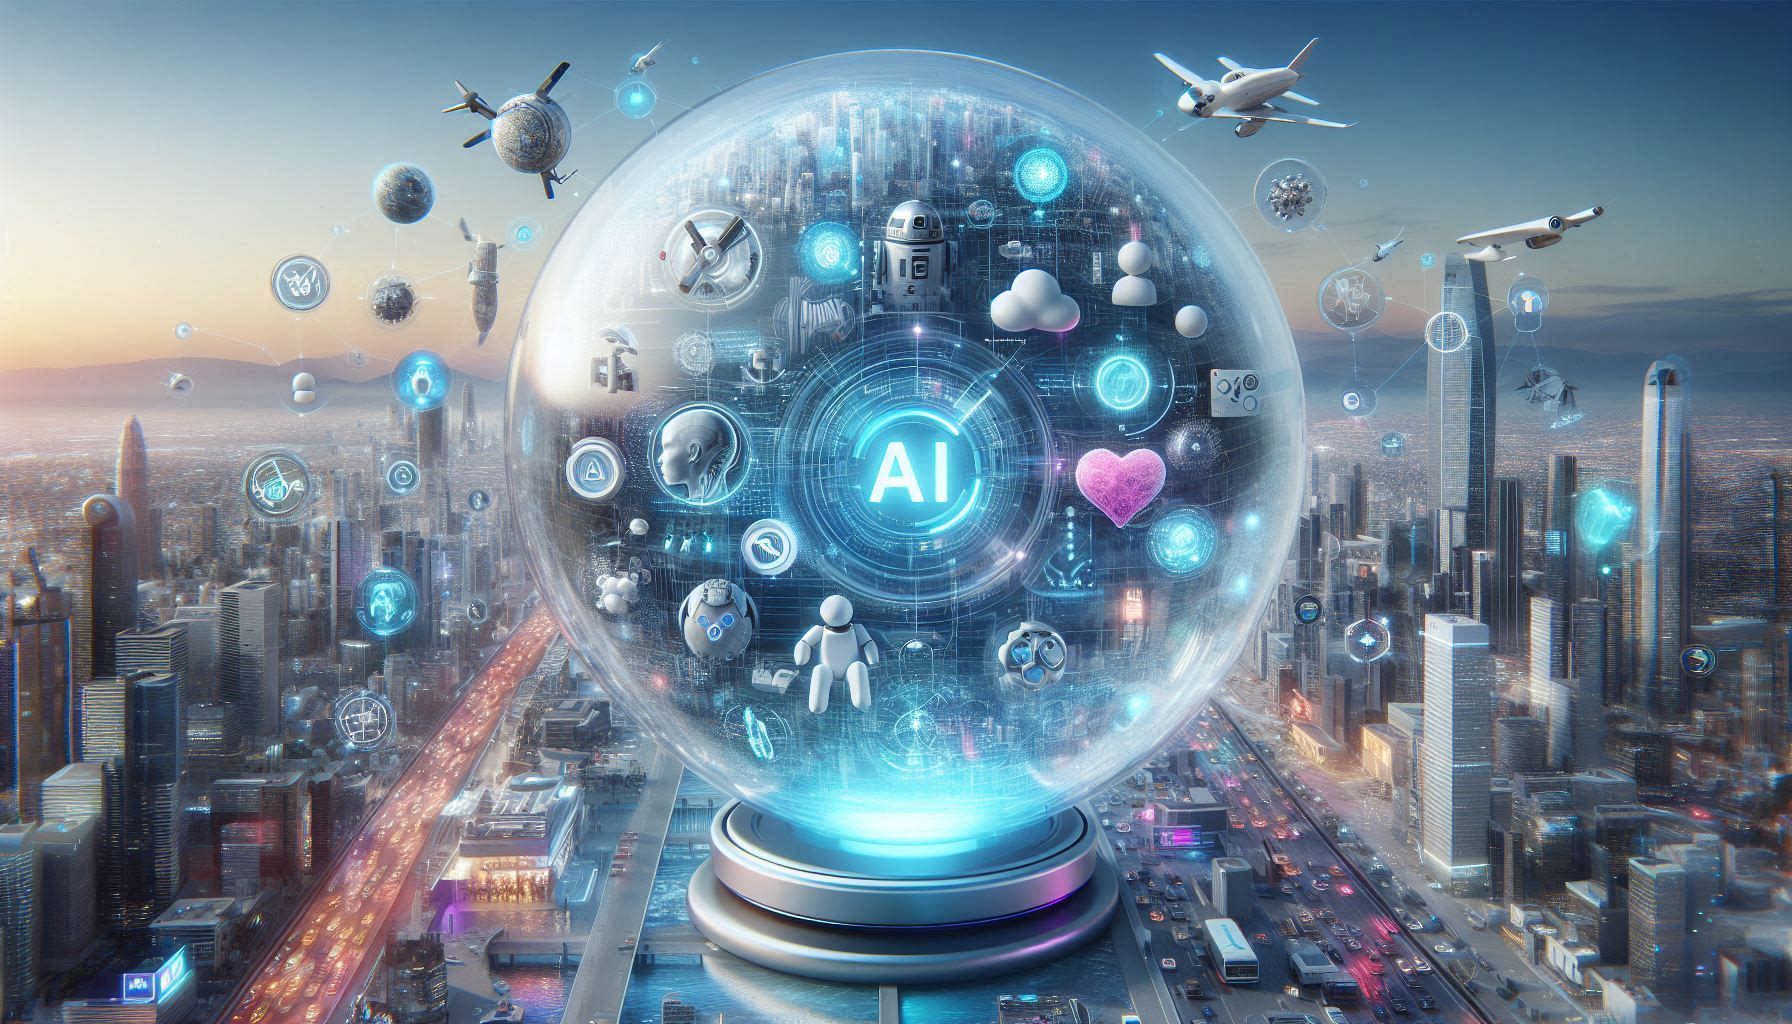 AI Appreciation Day: A large, transparent sphere floating in a futuristic cityscape, showcasing an ecosystem of various AI technologies and movie characters.